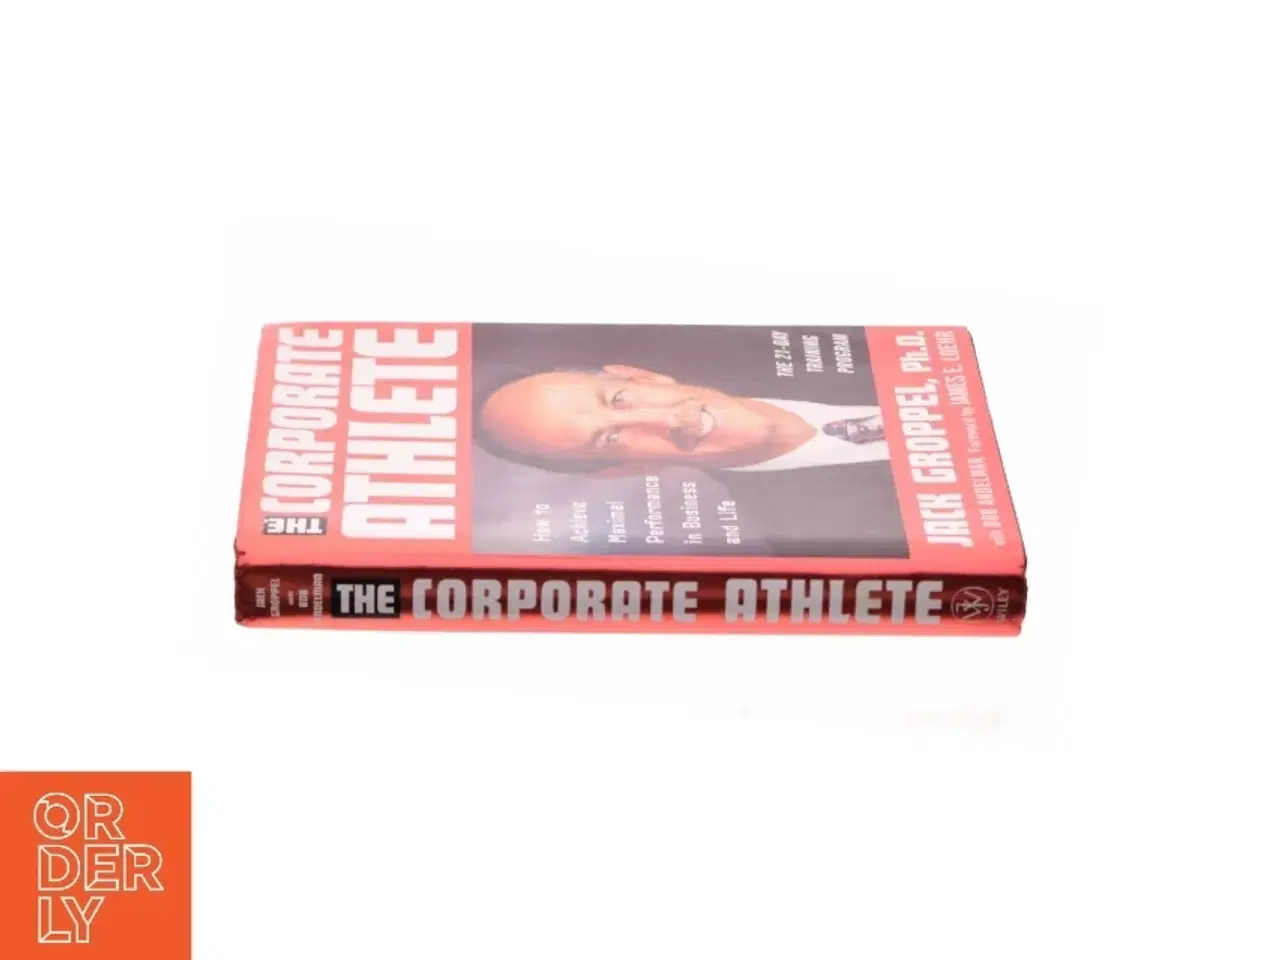 Billede 3 - The Corporate Athlete How to Achieve Maximal Performance in Business and Life af Jack L. Groppel (Bog)